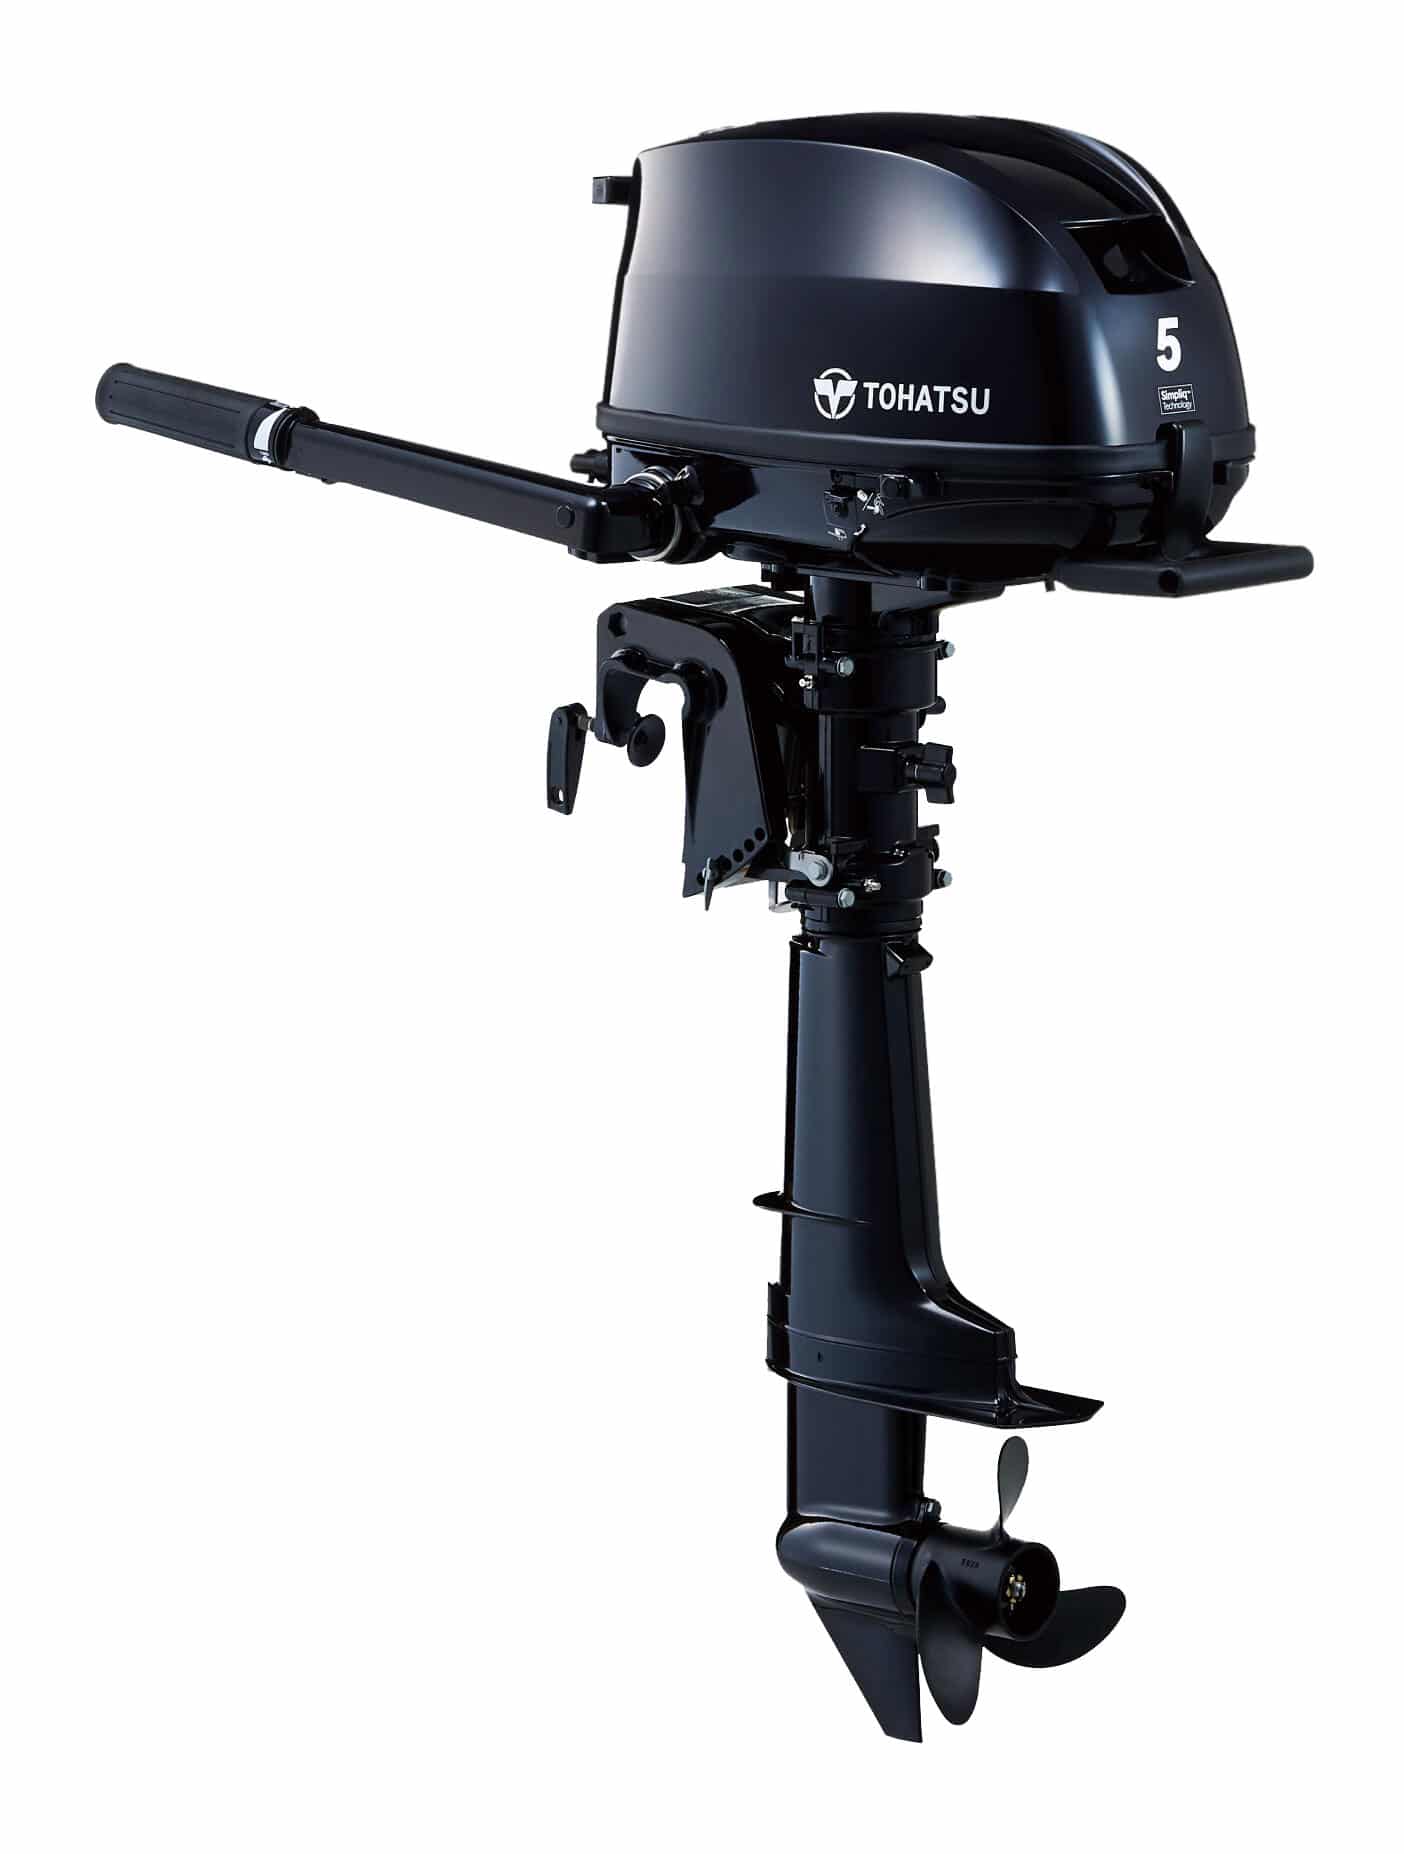 5HP Tohatsu Short Shaft 4-Stroke Outboard Motor with 12 Litre External Fuel Tank